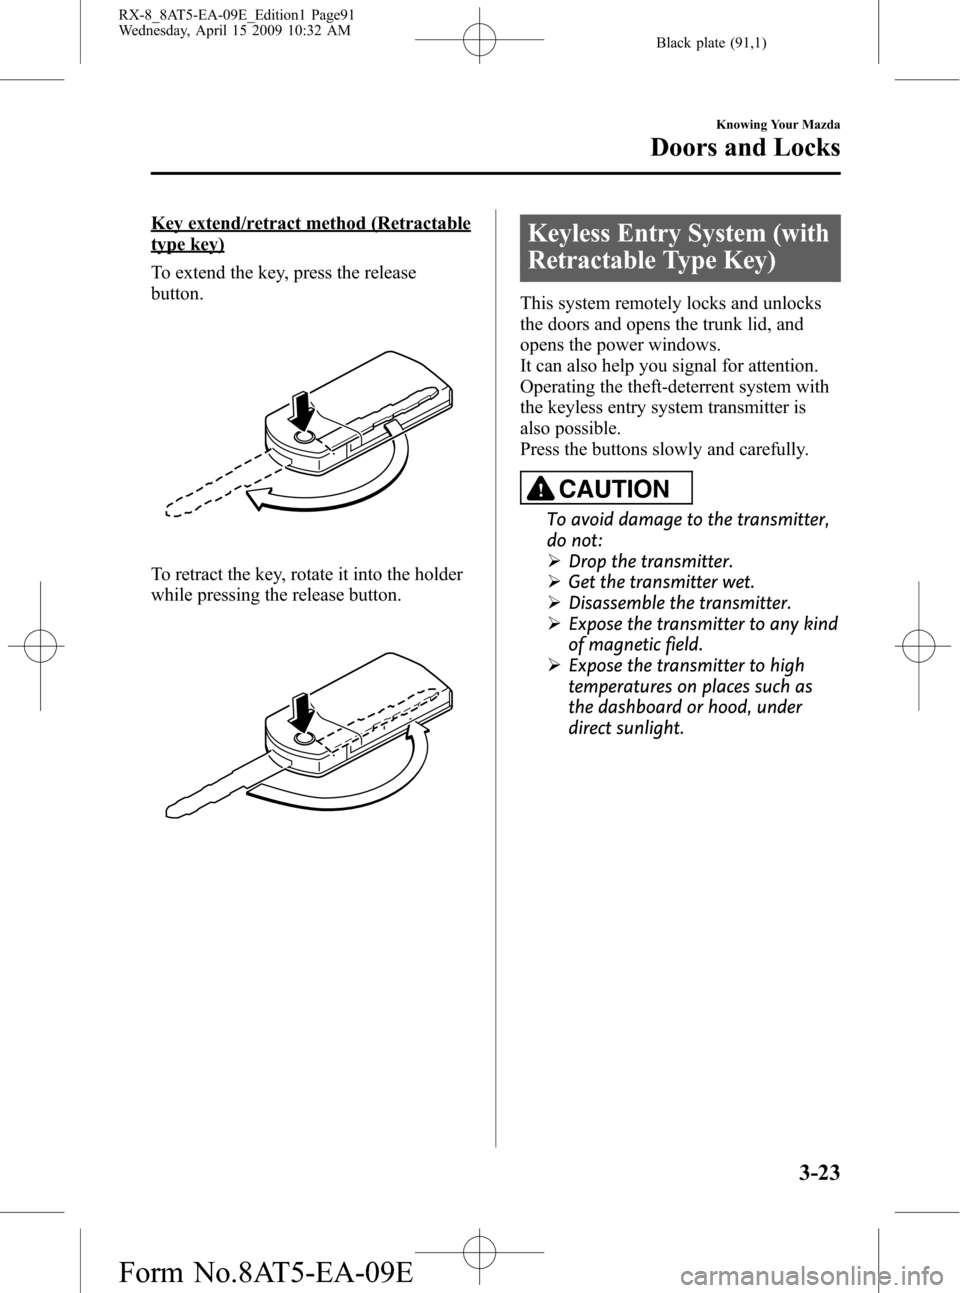 MAZDA MODEL RX 8 2010  Owners Manual (in English) Black plate (91,1)
Key extend/retract method (Retractable
type key)
To extend the key, press the release
button.
To retract the key, rotate it into the holder
while pressing the release button.
Keyles